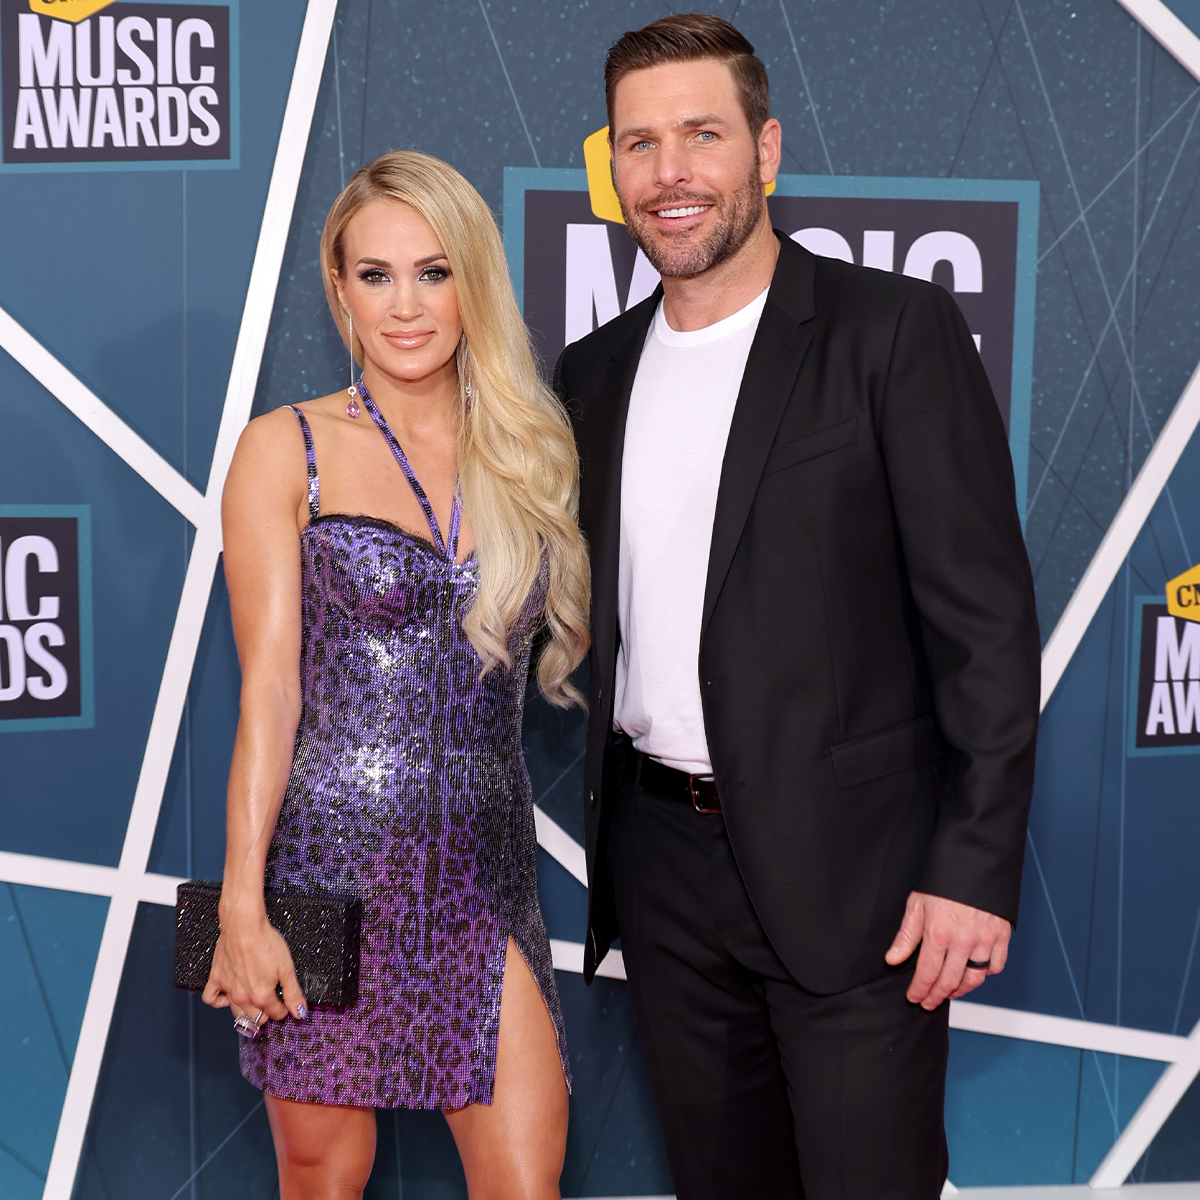 Carrie Underwood marks special anniversary with husband Mike Fisher